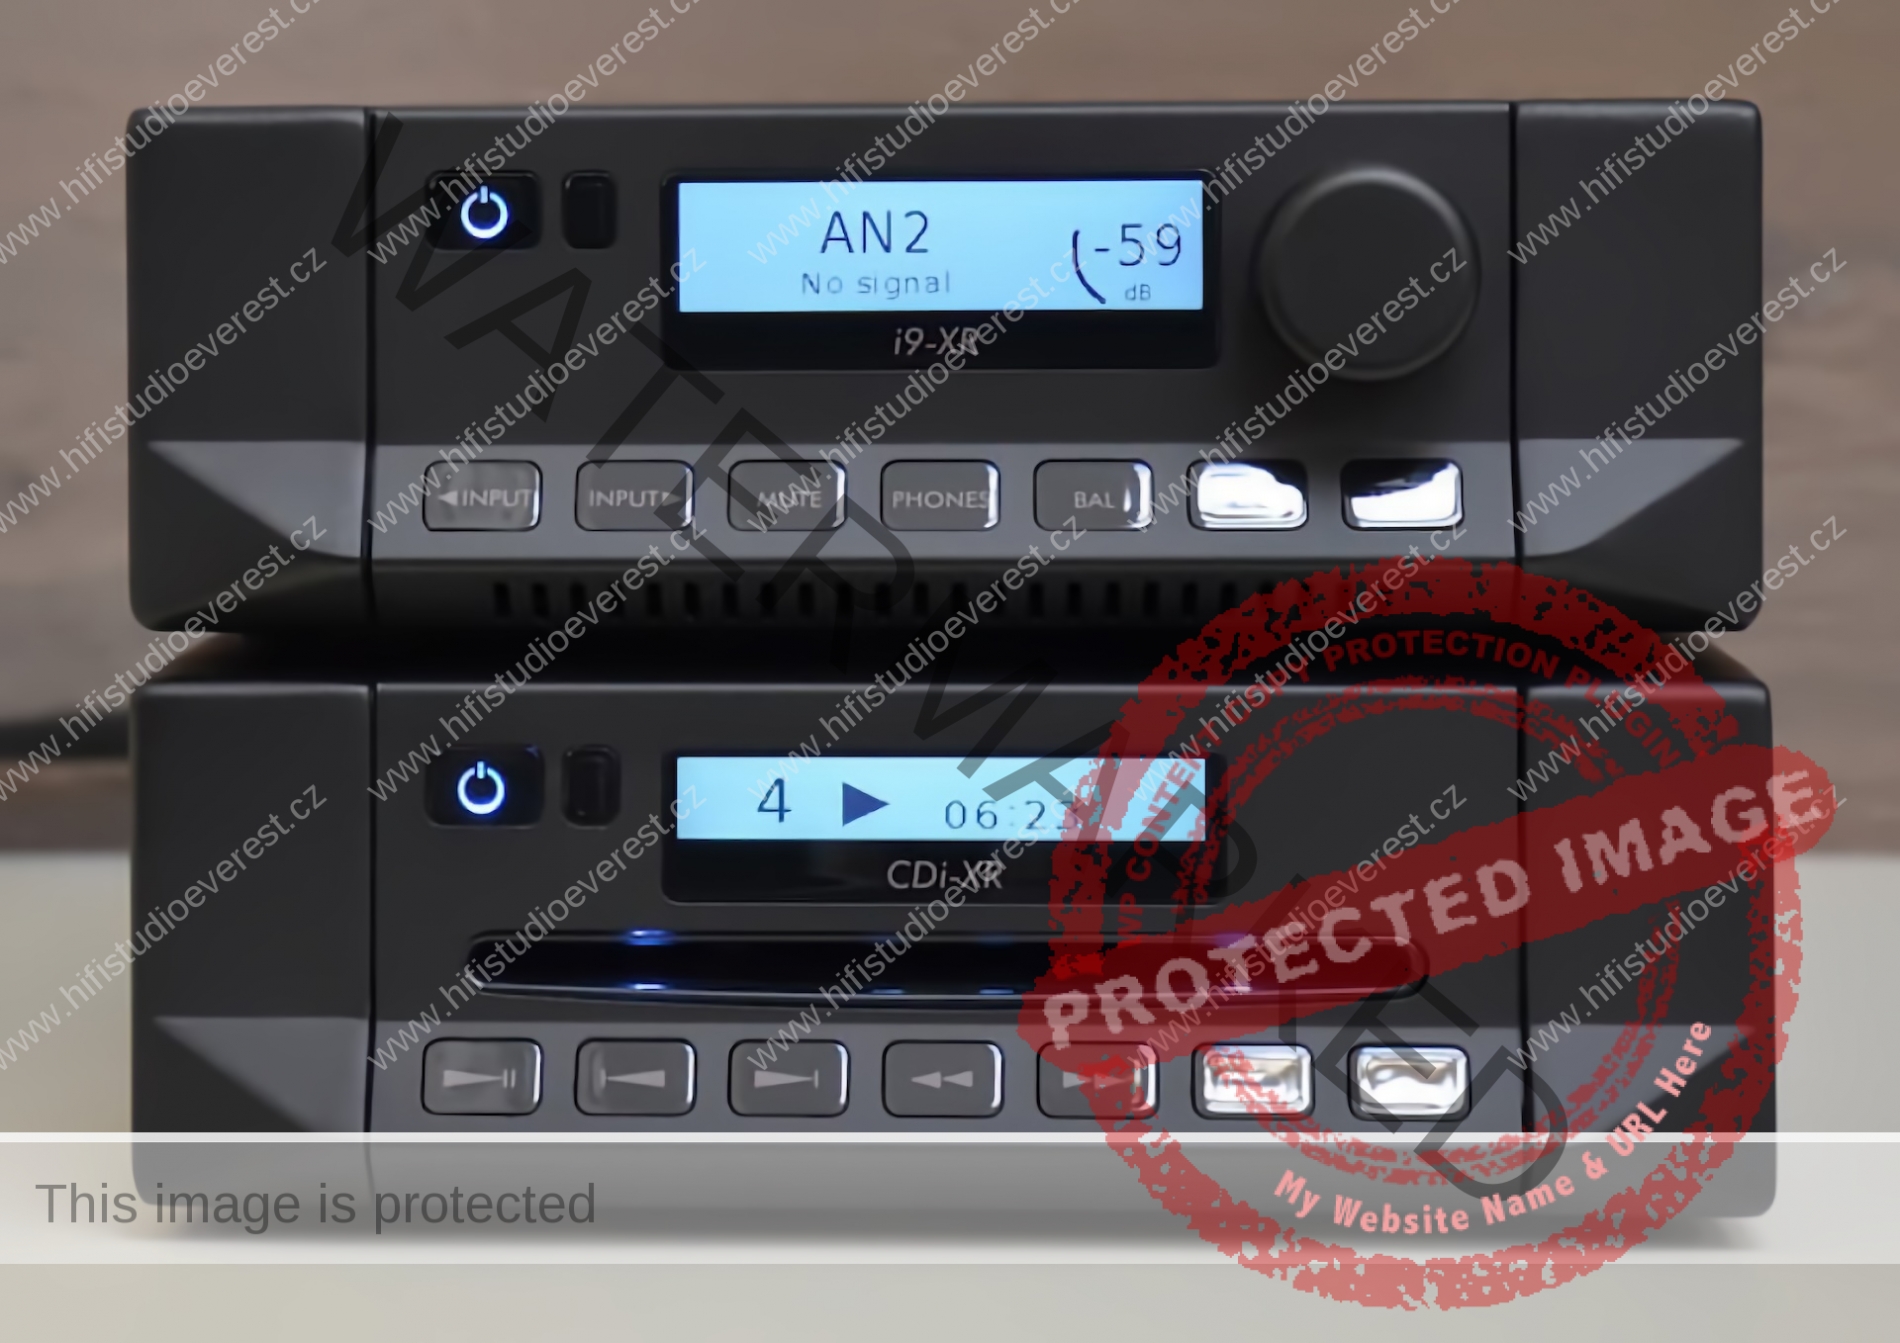 cyrus-audio-i9-xr-cdi-xr-main-page-DONE-denoised-kopie-by-hifi-studio-everest